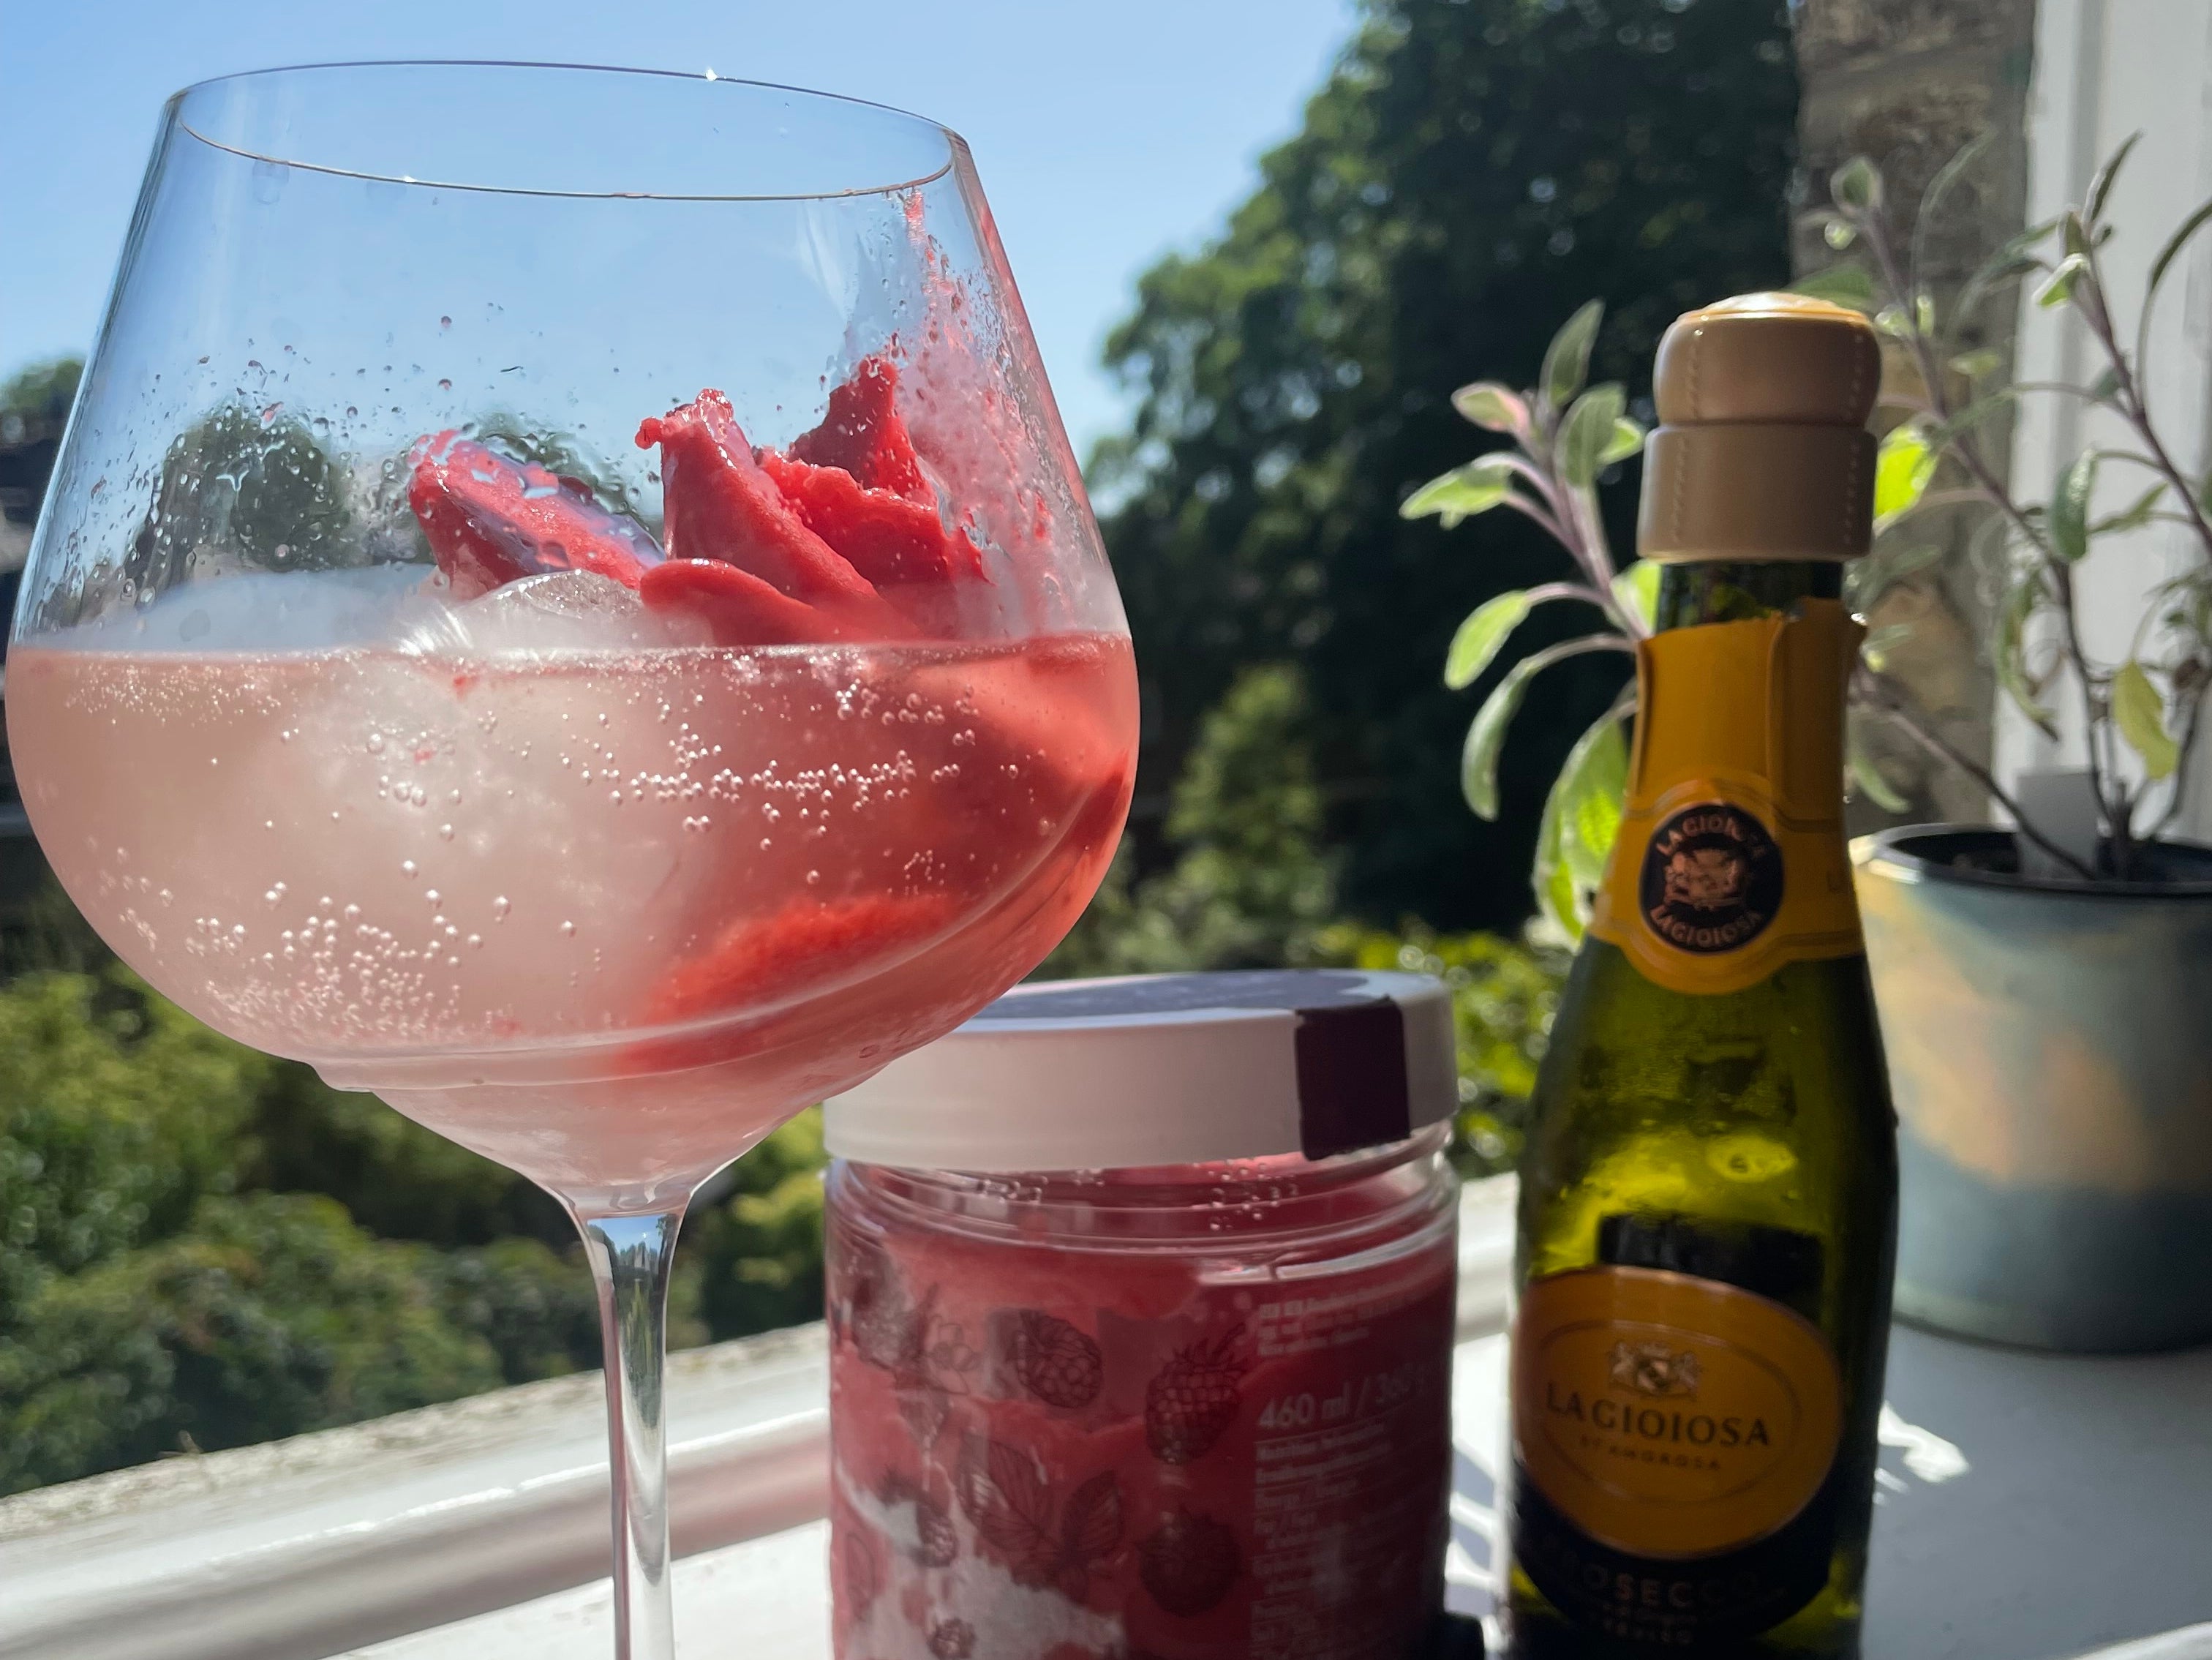 A new viral recipe for a sorbet prosecco cocktail has emerged on TikTok, just in time for the summer